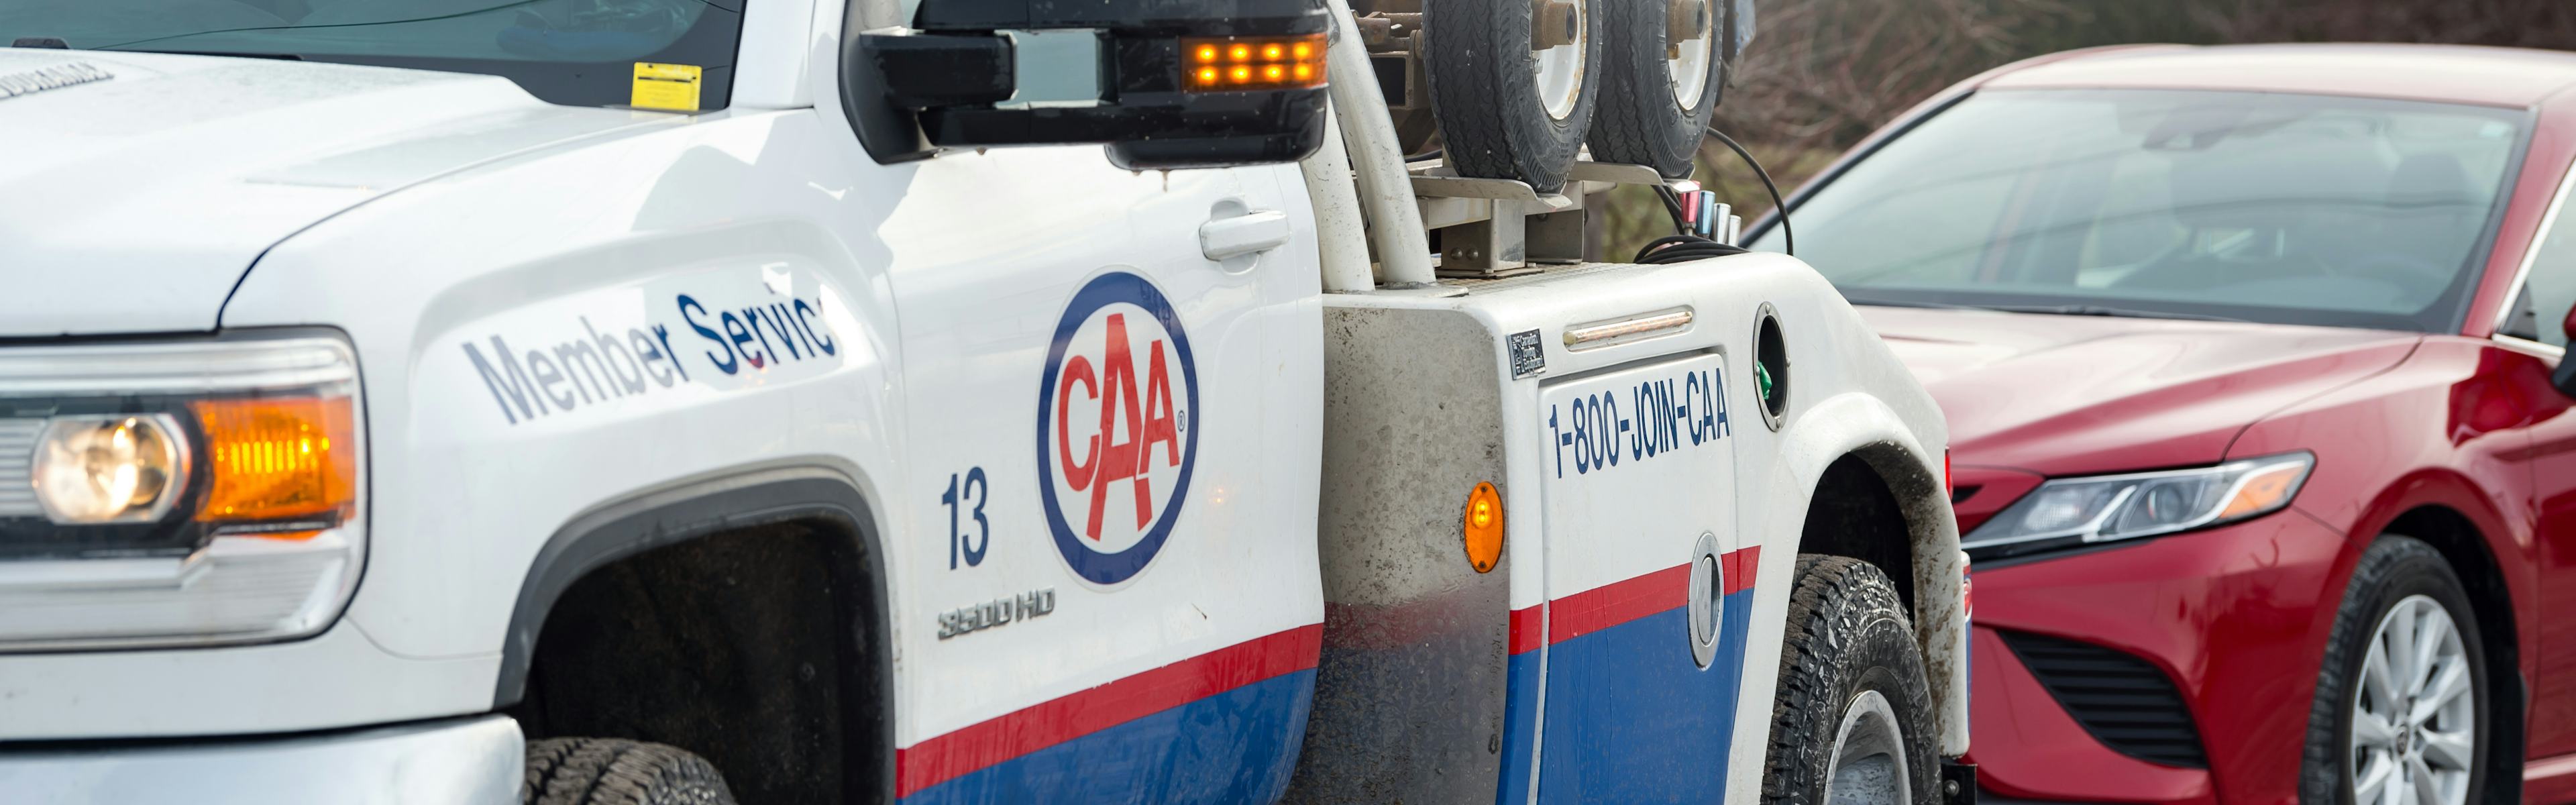 A CAA tow truck providing roadside assistance to a red car. CAA leaves your manufacturers roadside assistance plan in the dust (including kia roadside assistance, mazda roadside assistance, nissan roadside assistance